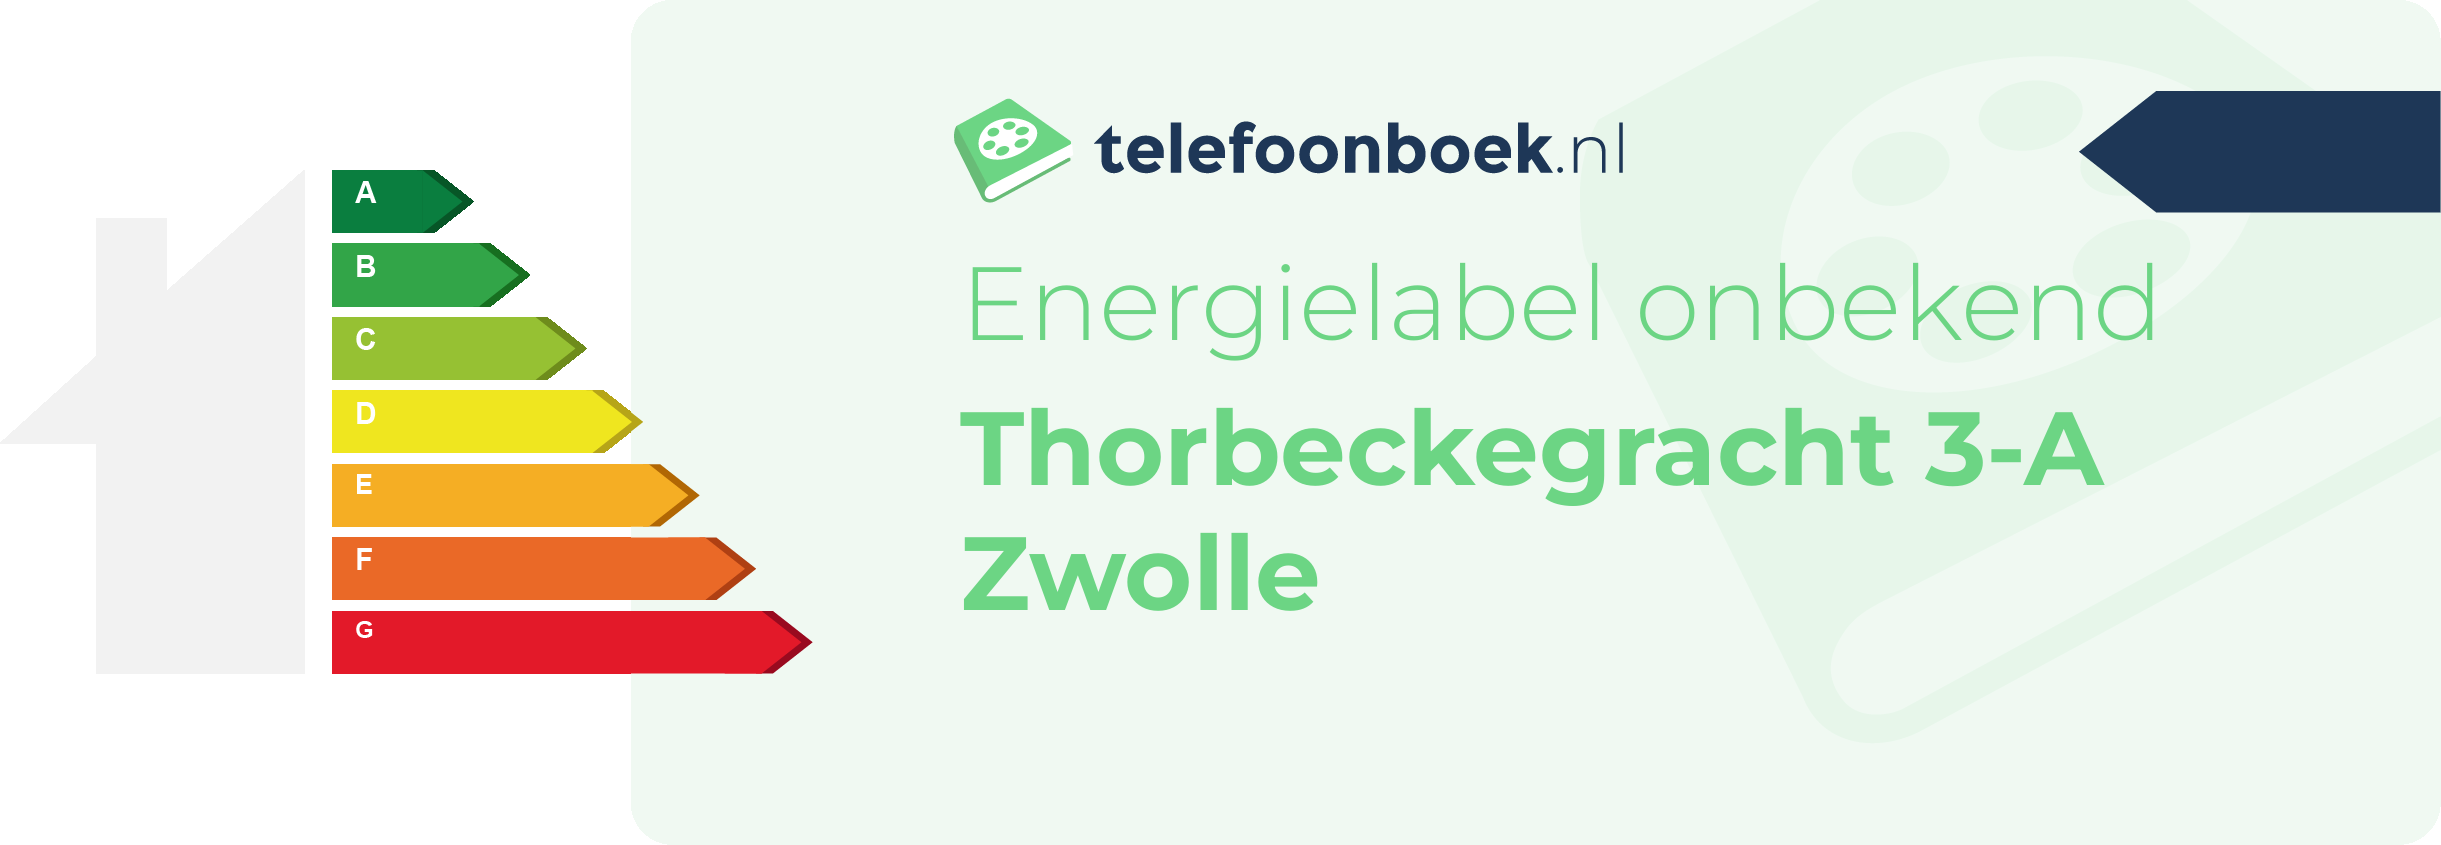 Energielabel Thorbeckegracht 3-A Zwolle